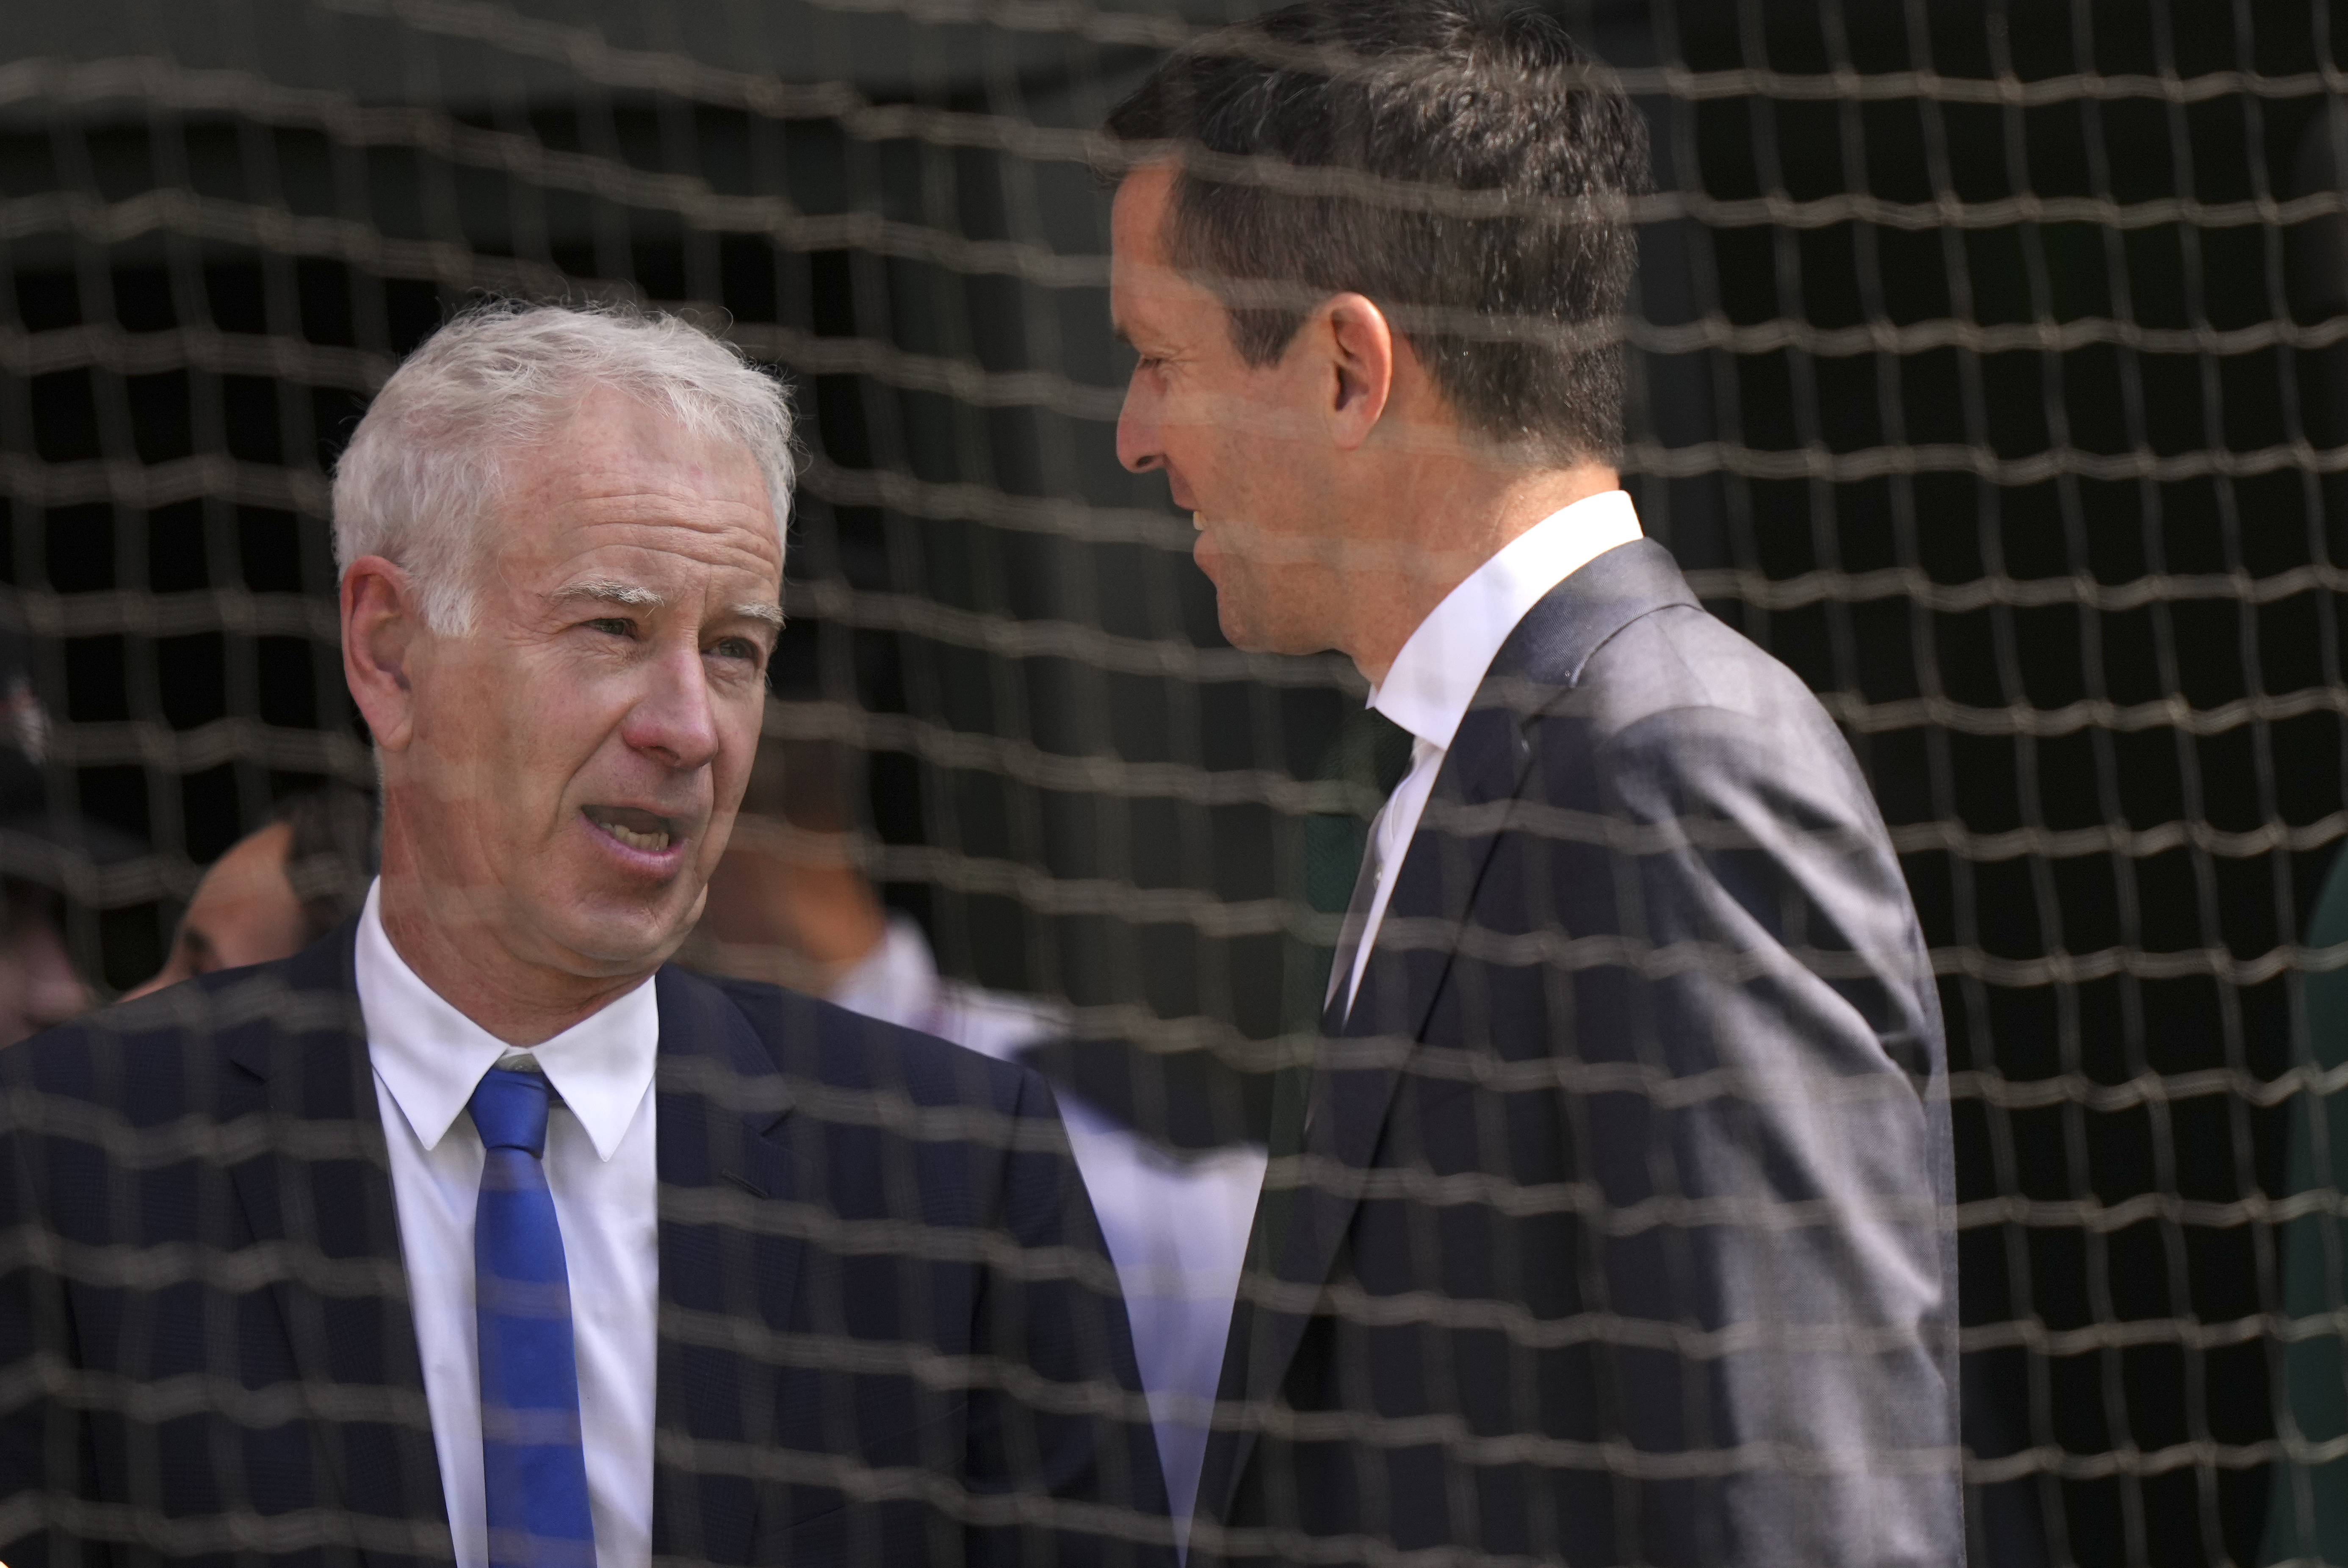 John McEnroe says he tested positive for COVID and will miss US Open TV coverage